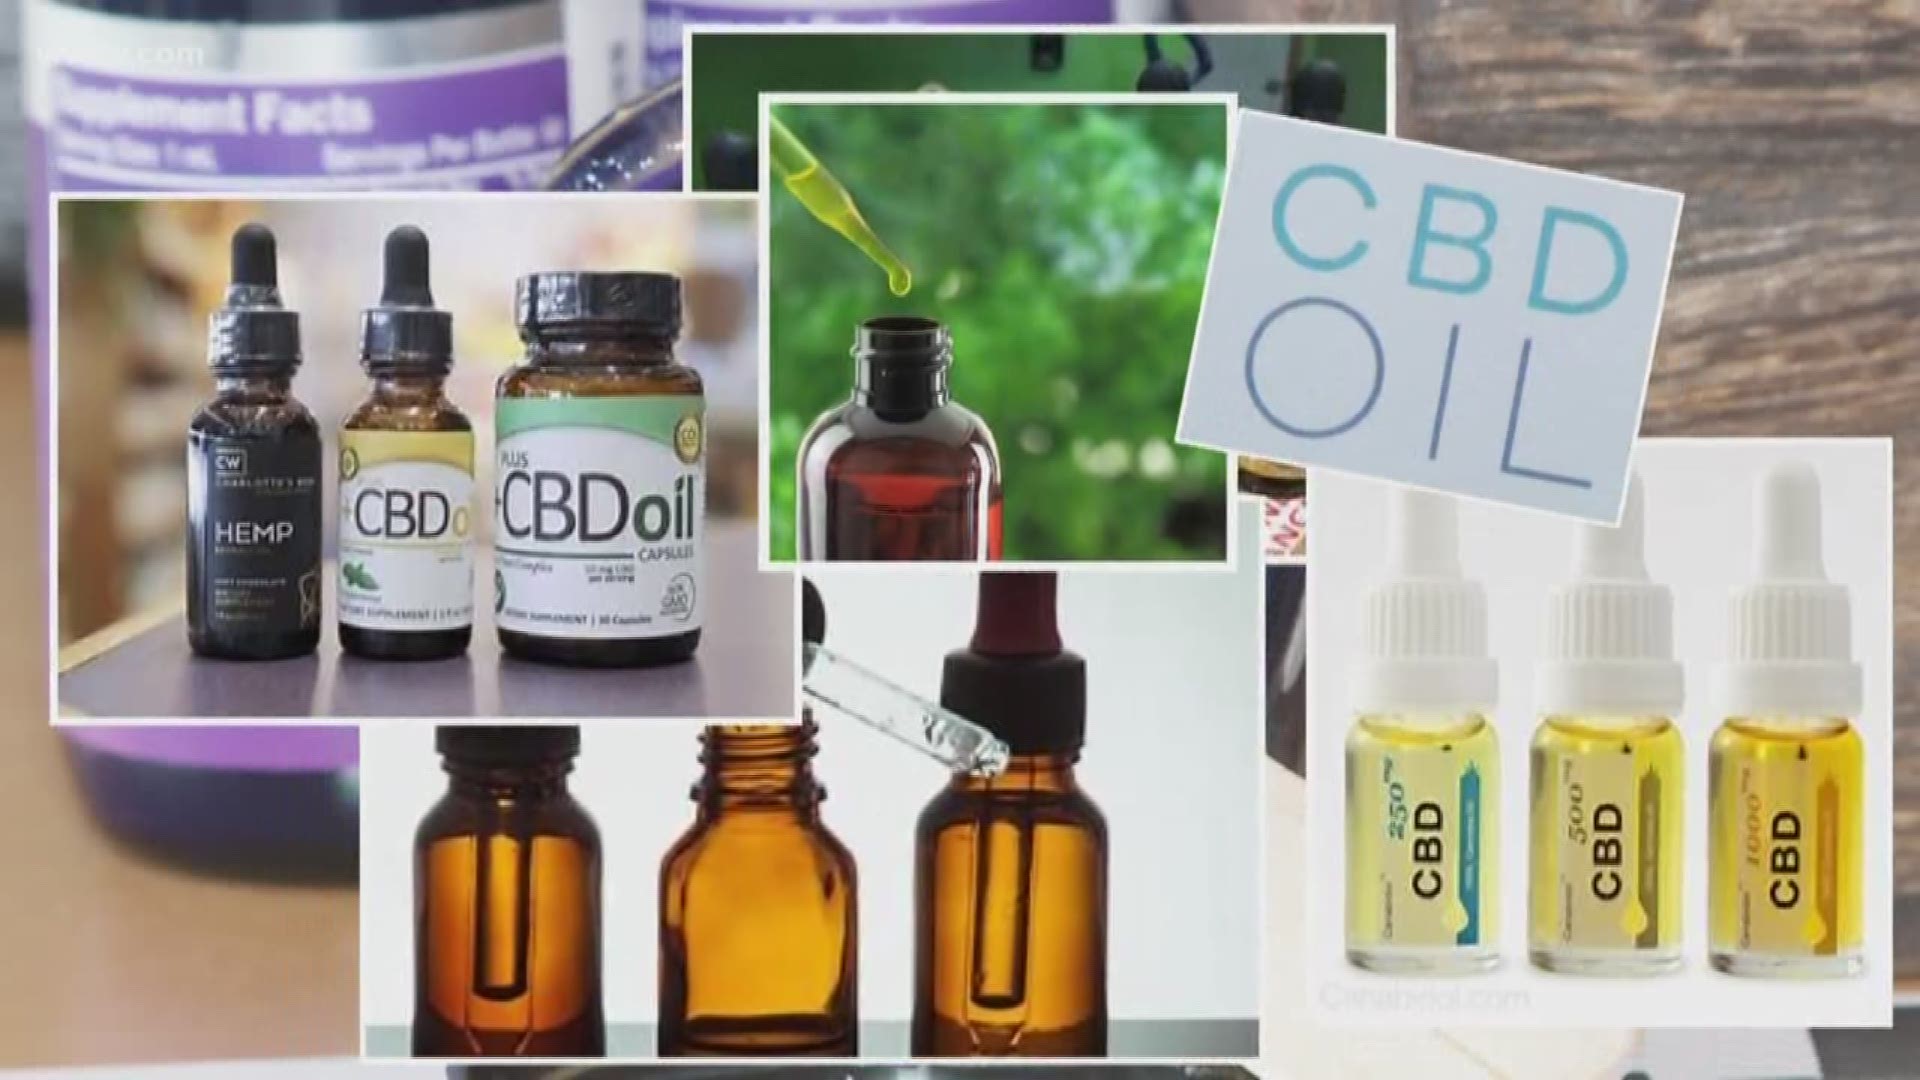 CBD Oil: Life-changing miracle medicine or an unregulated danger? | wwltv.com